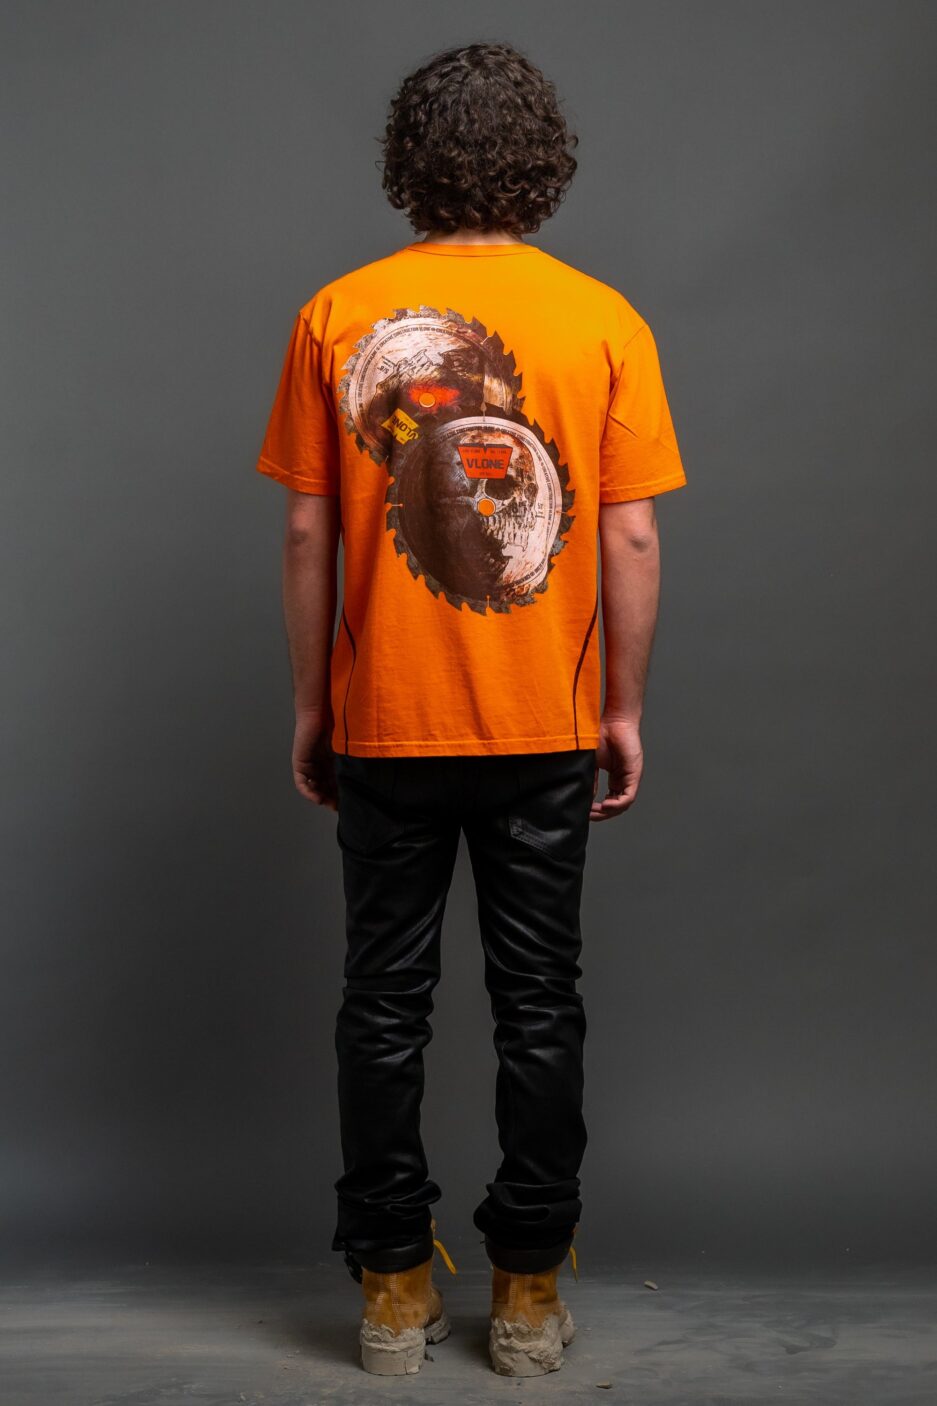 Rusted Supplies S T Shirt